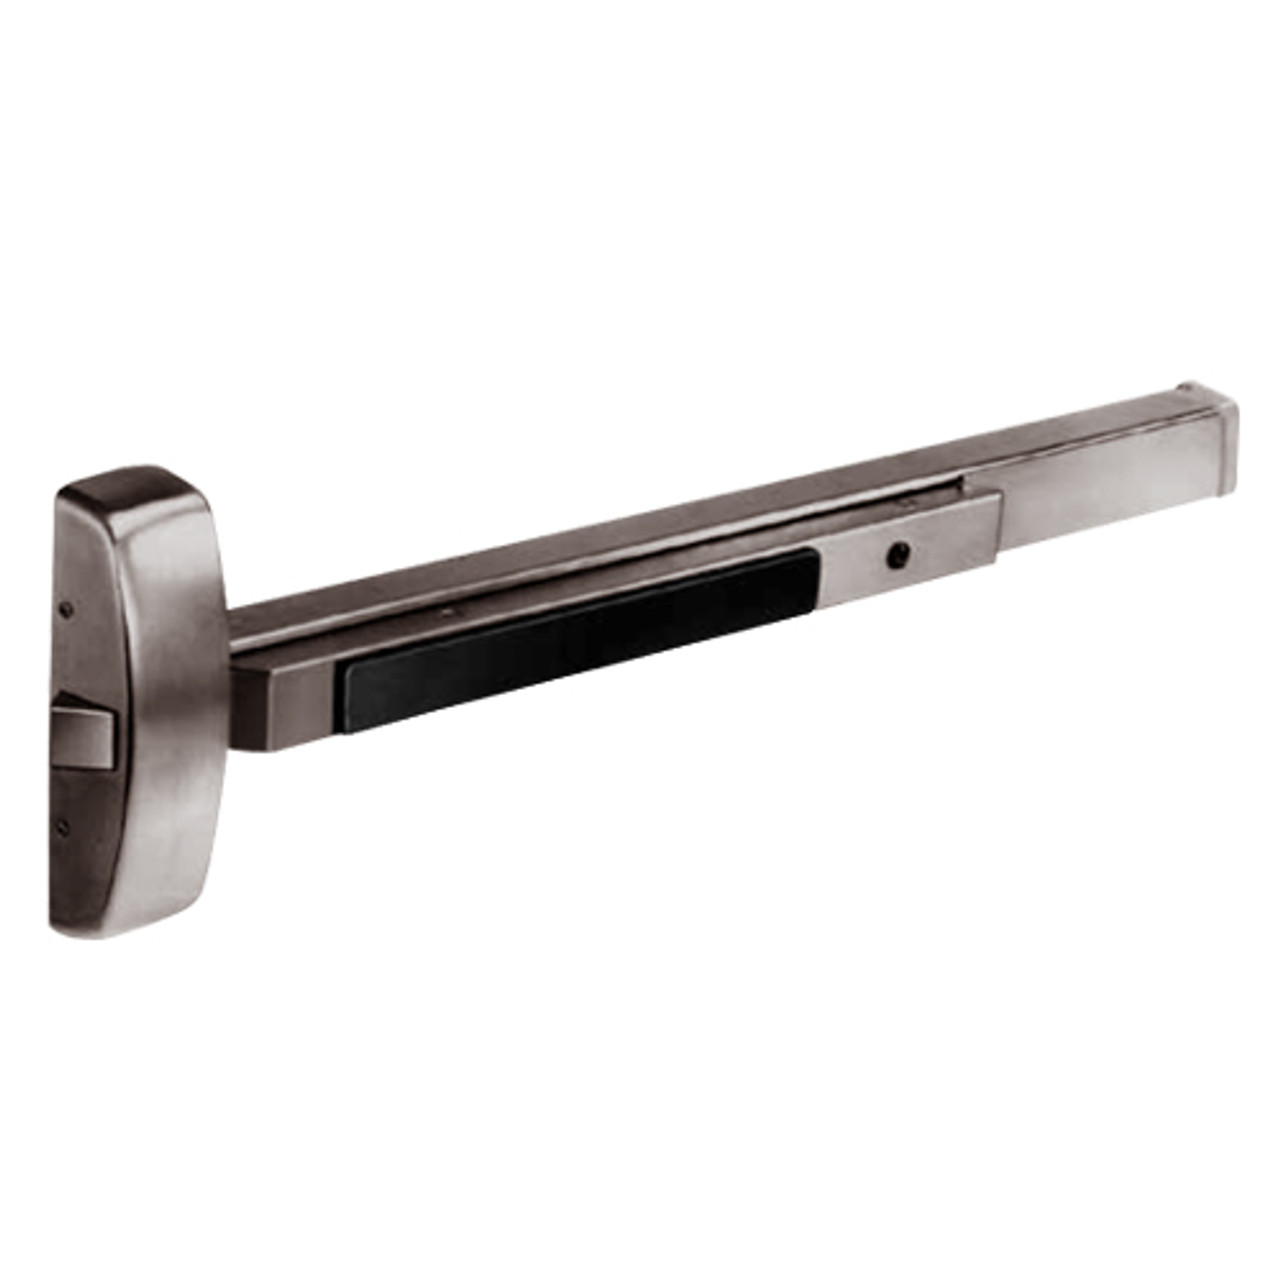 8810E-32D Sargent 80 Series Exit Only Rim Exit Device in Satin Stainless Steel